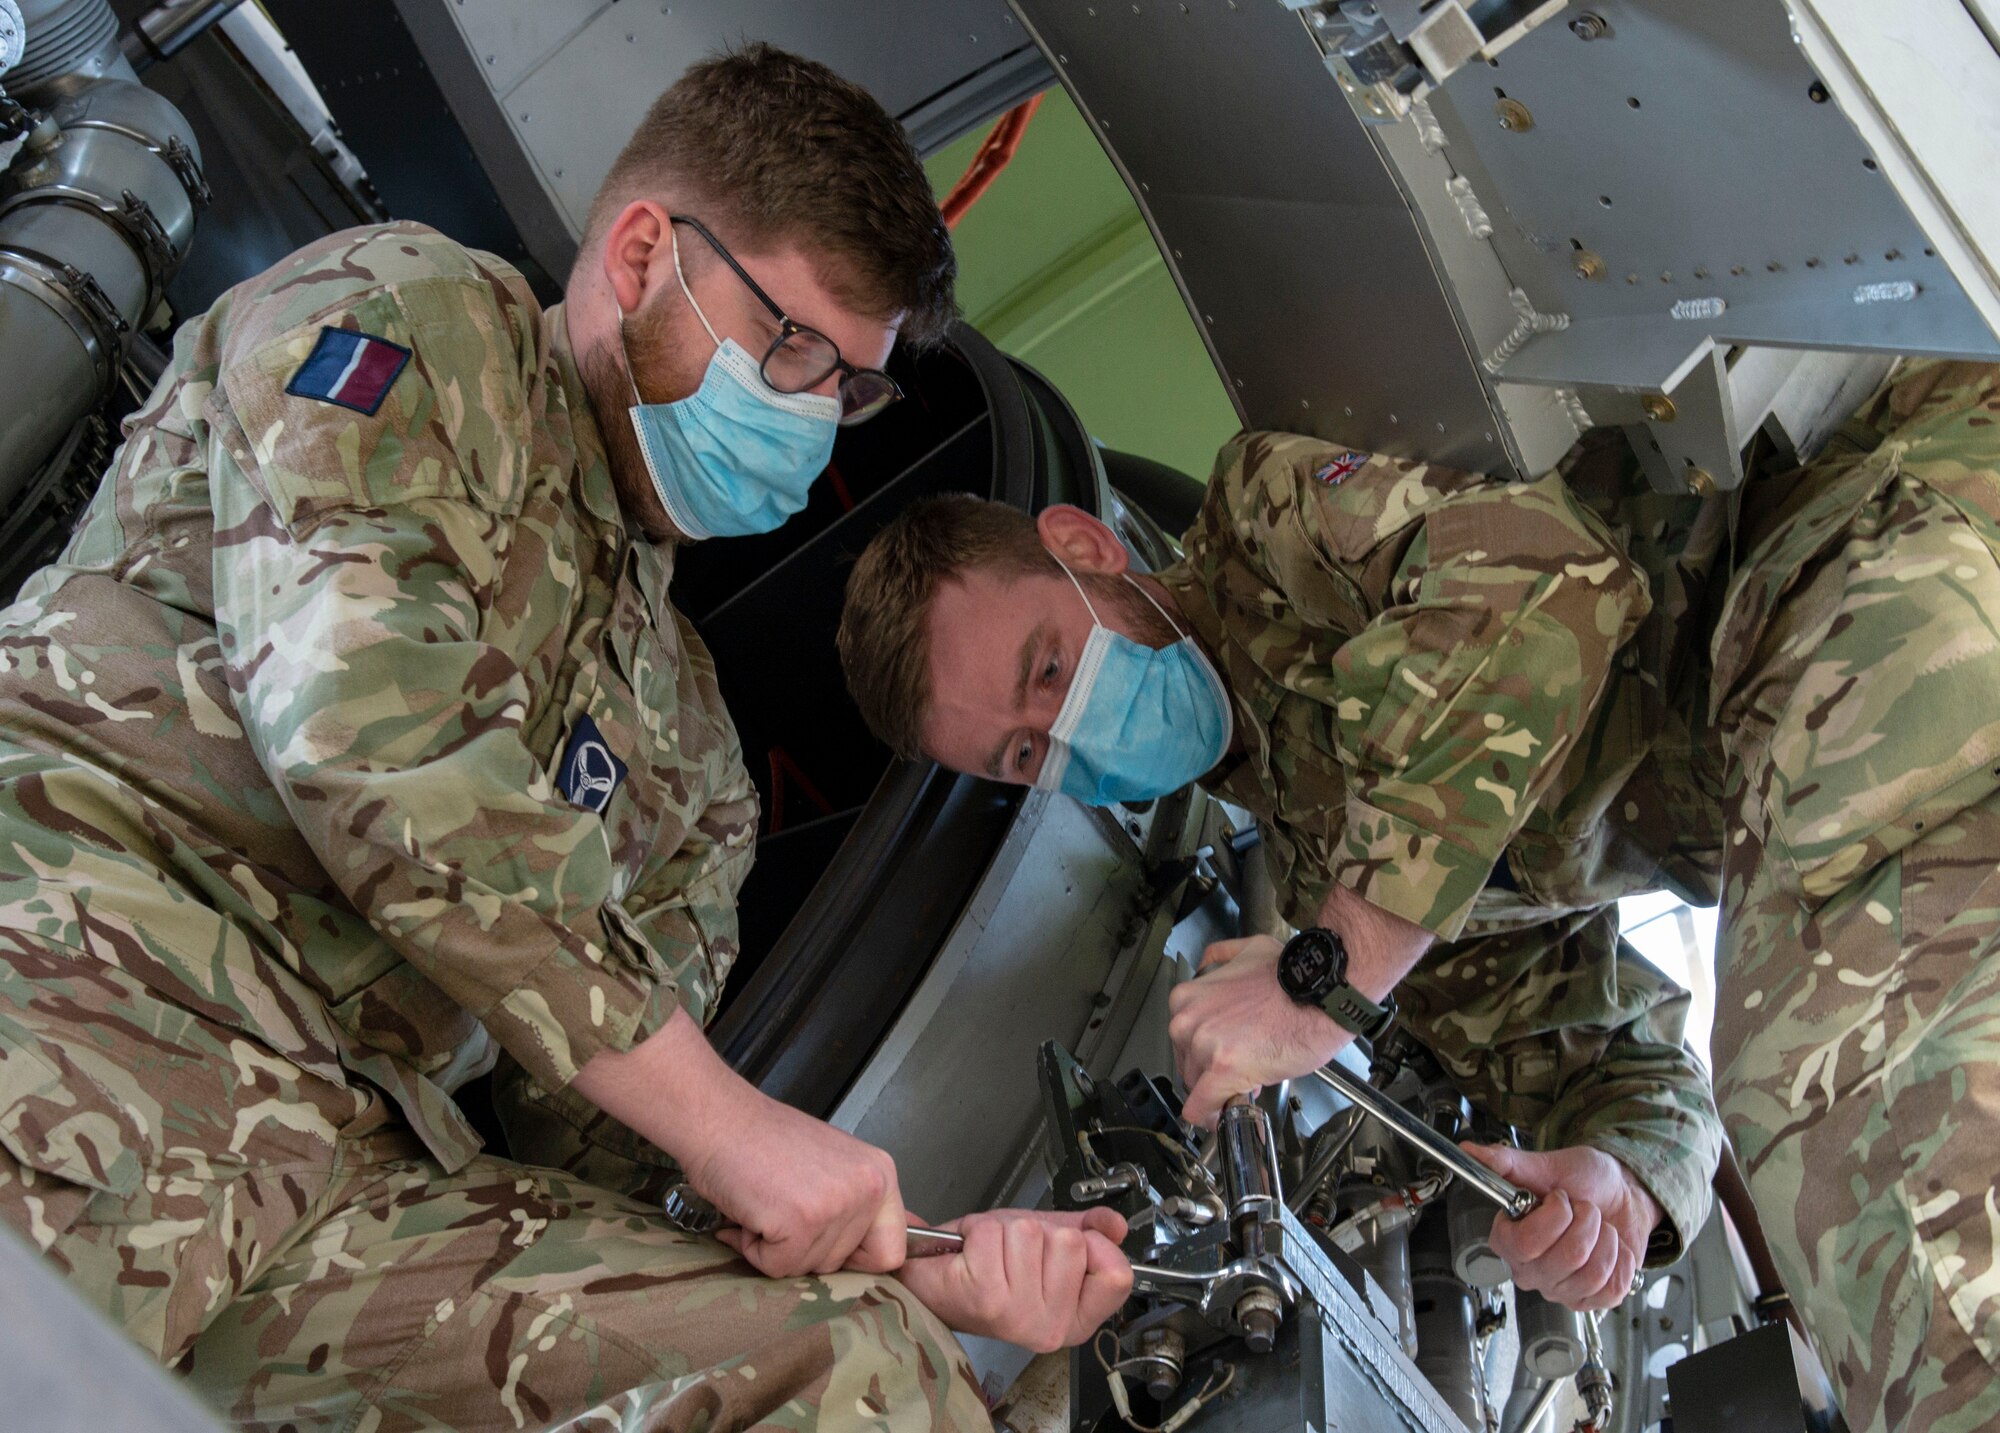 Royal Air Force Senior Aircraftman Technician Joseph Eastham holds a wrench as RAF Cpl. Ben Archer loosens a bolt from a C-17 engine trainer at Dover Air Force Base, Delaware, Feb. 15, 2022. Eastham and Archer, both C-17 Globemaster maintainers from 99 Squadron, RAF Brize Norton, United Kingdom, attended the 64-hour C-17 Engine Change course where they learned how to safely remove and reinstall the Pratt & Whitney F117-PW-100 turbofan engine. (U.S. Air Force photo by Roland Balik)